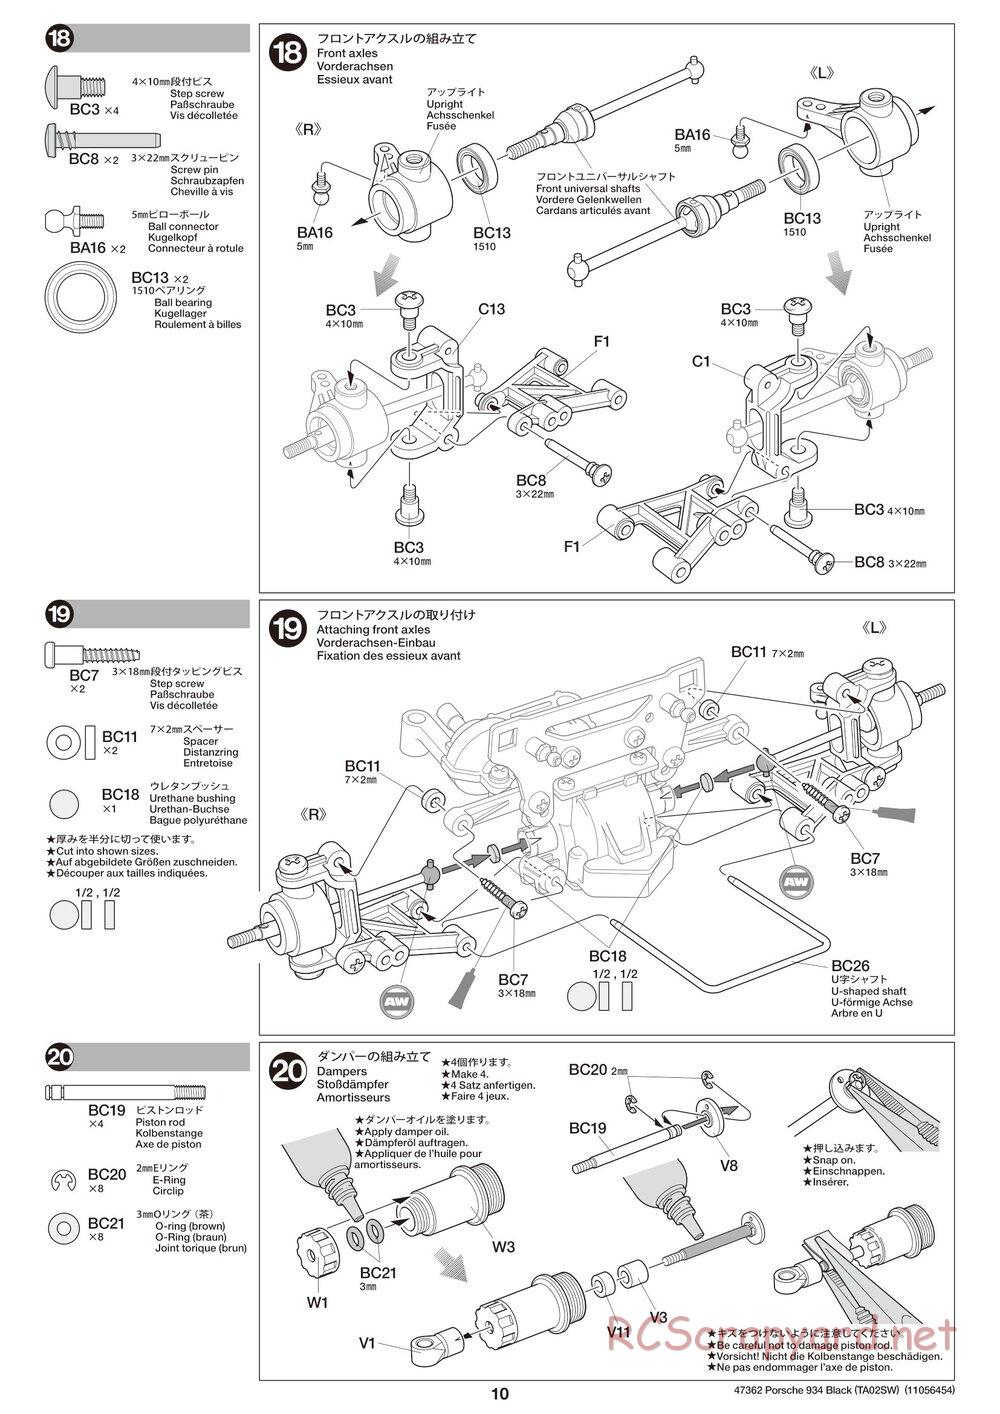 Tamiya - TT-02 White Special Chassis - Manual - Page 10